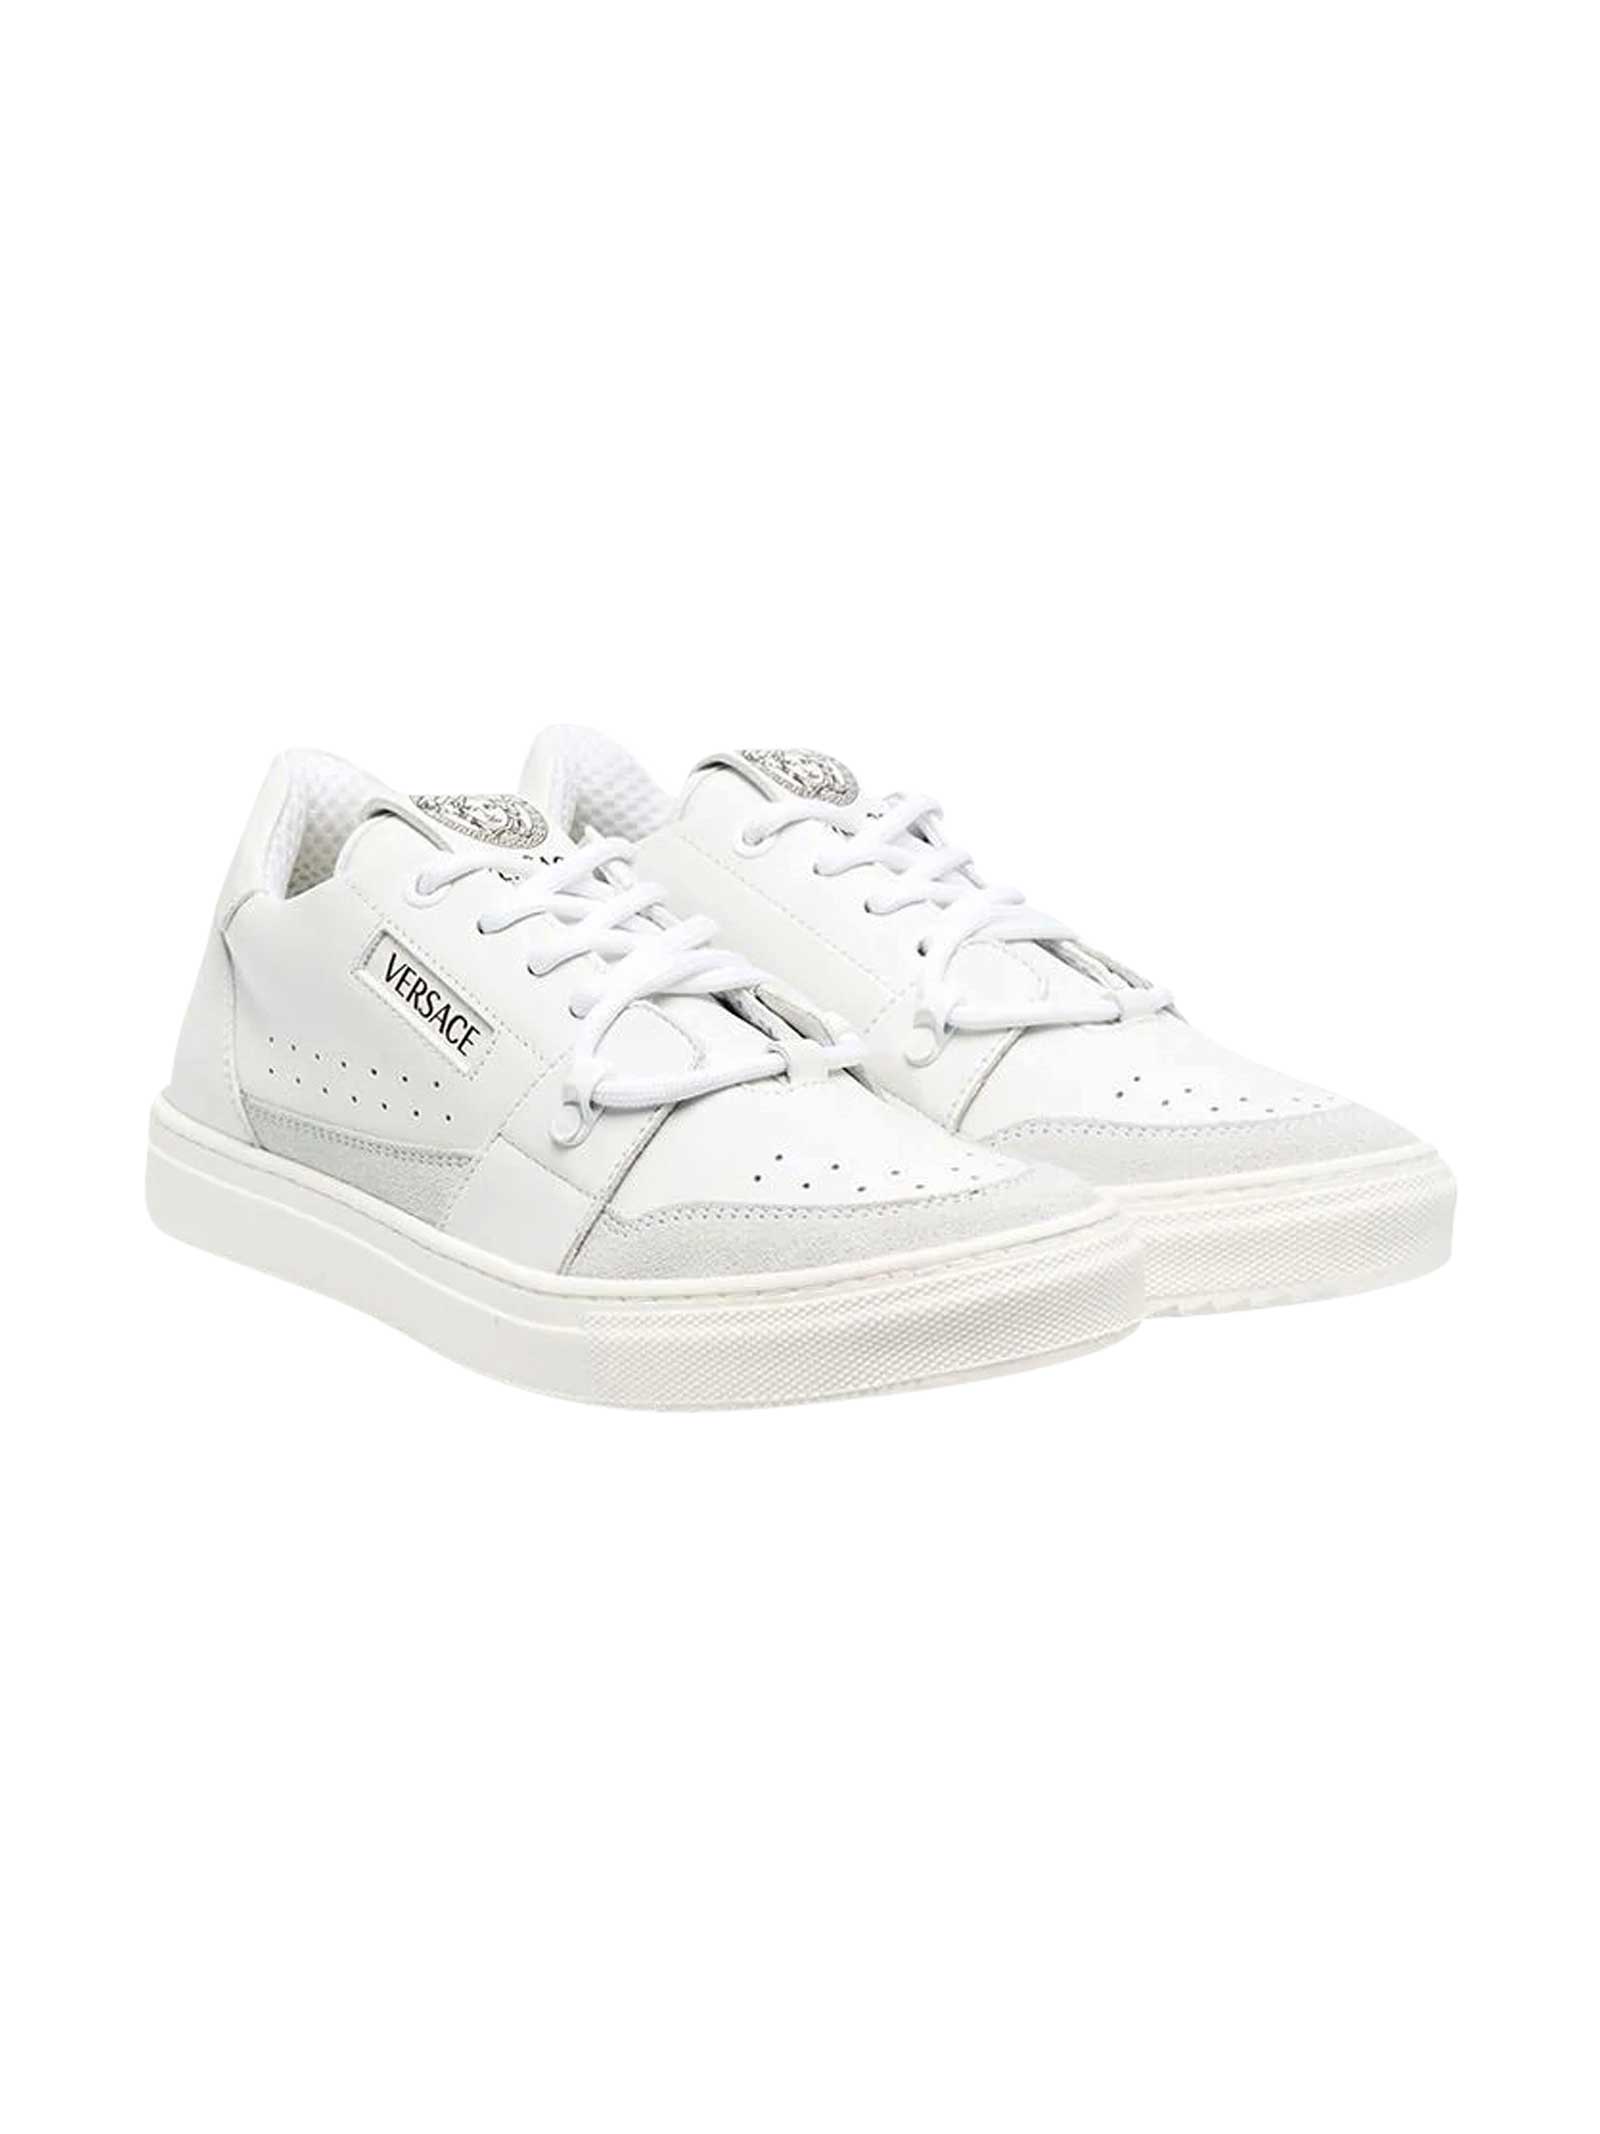 Buy Versace Young White Sneakers online, shop Versace shoes with free shipping